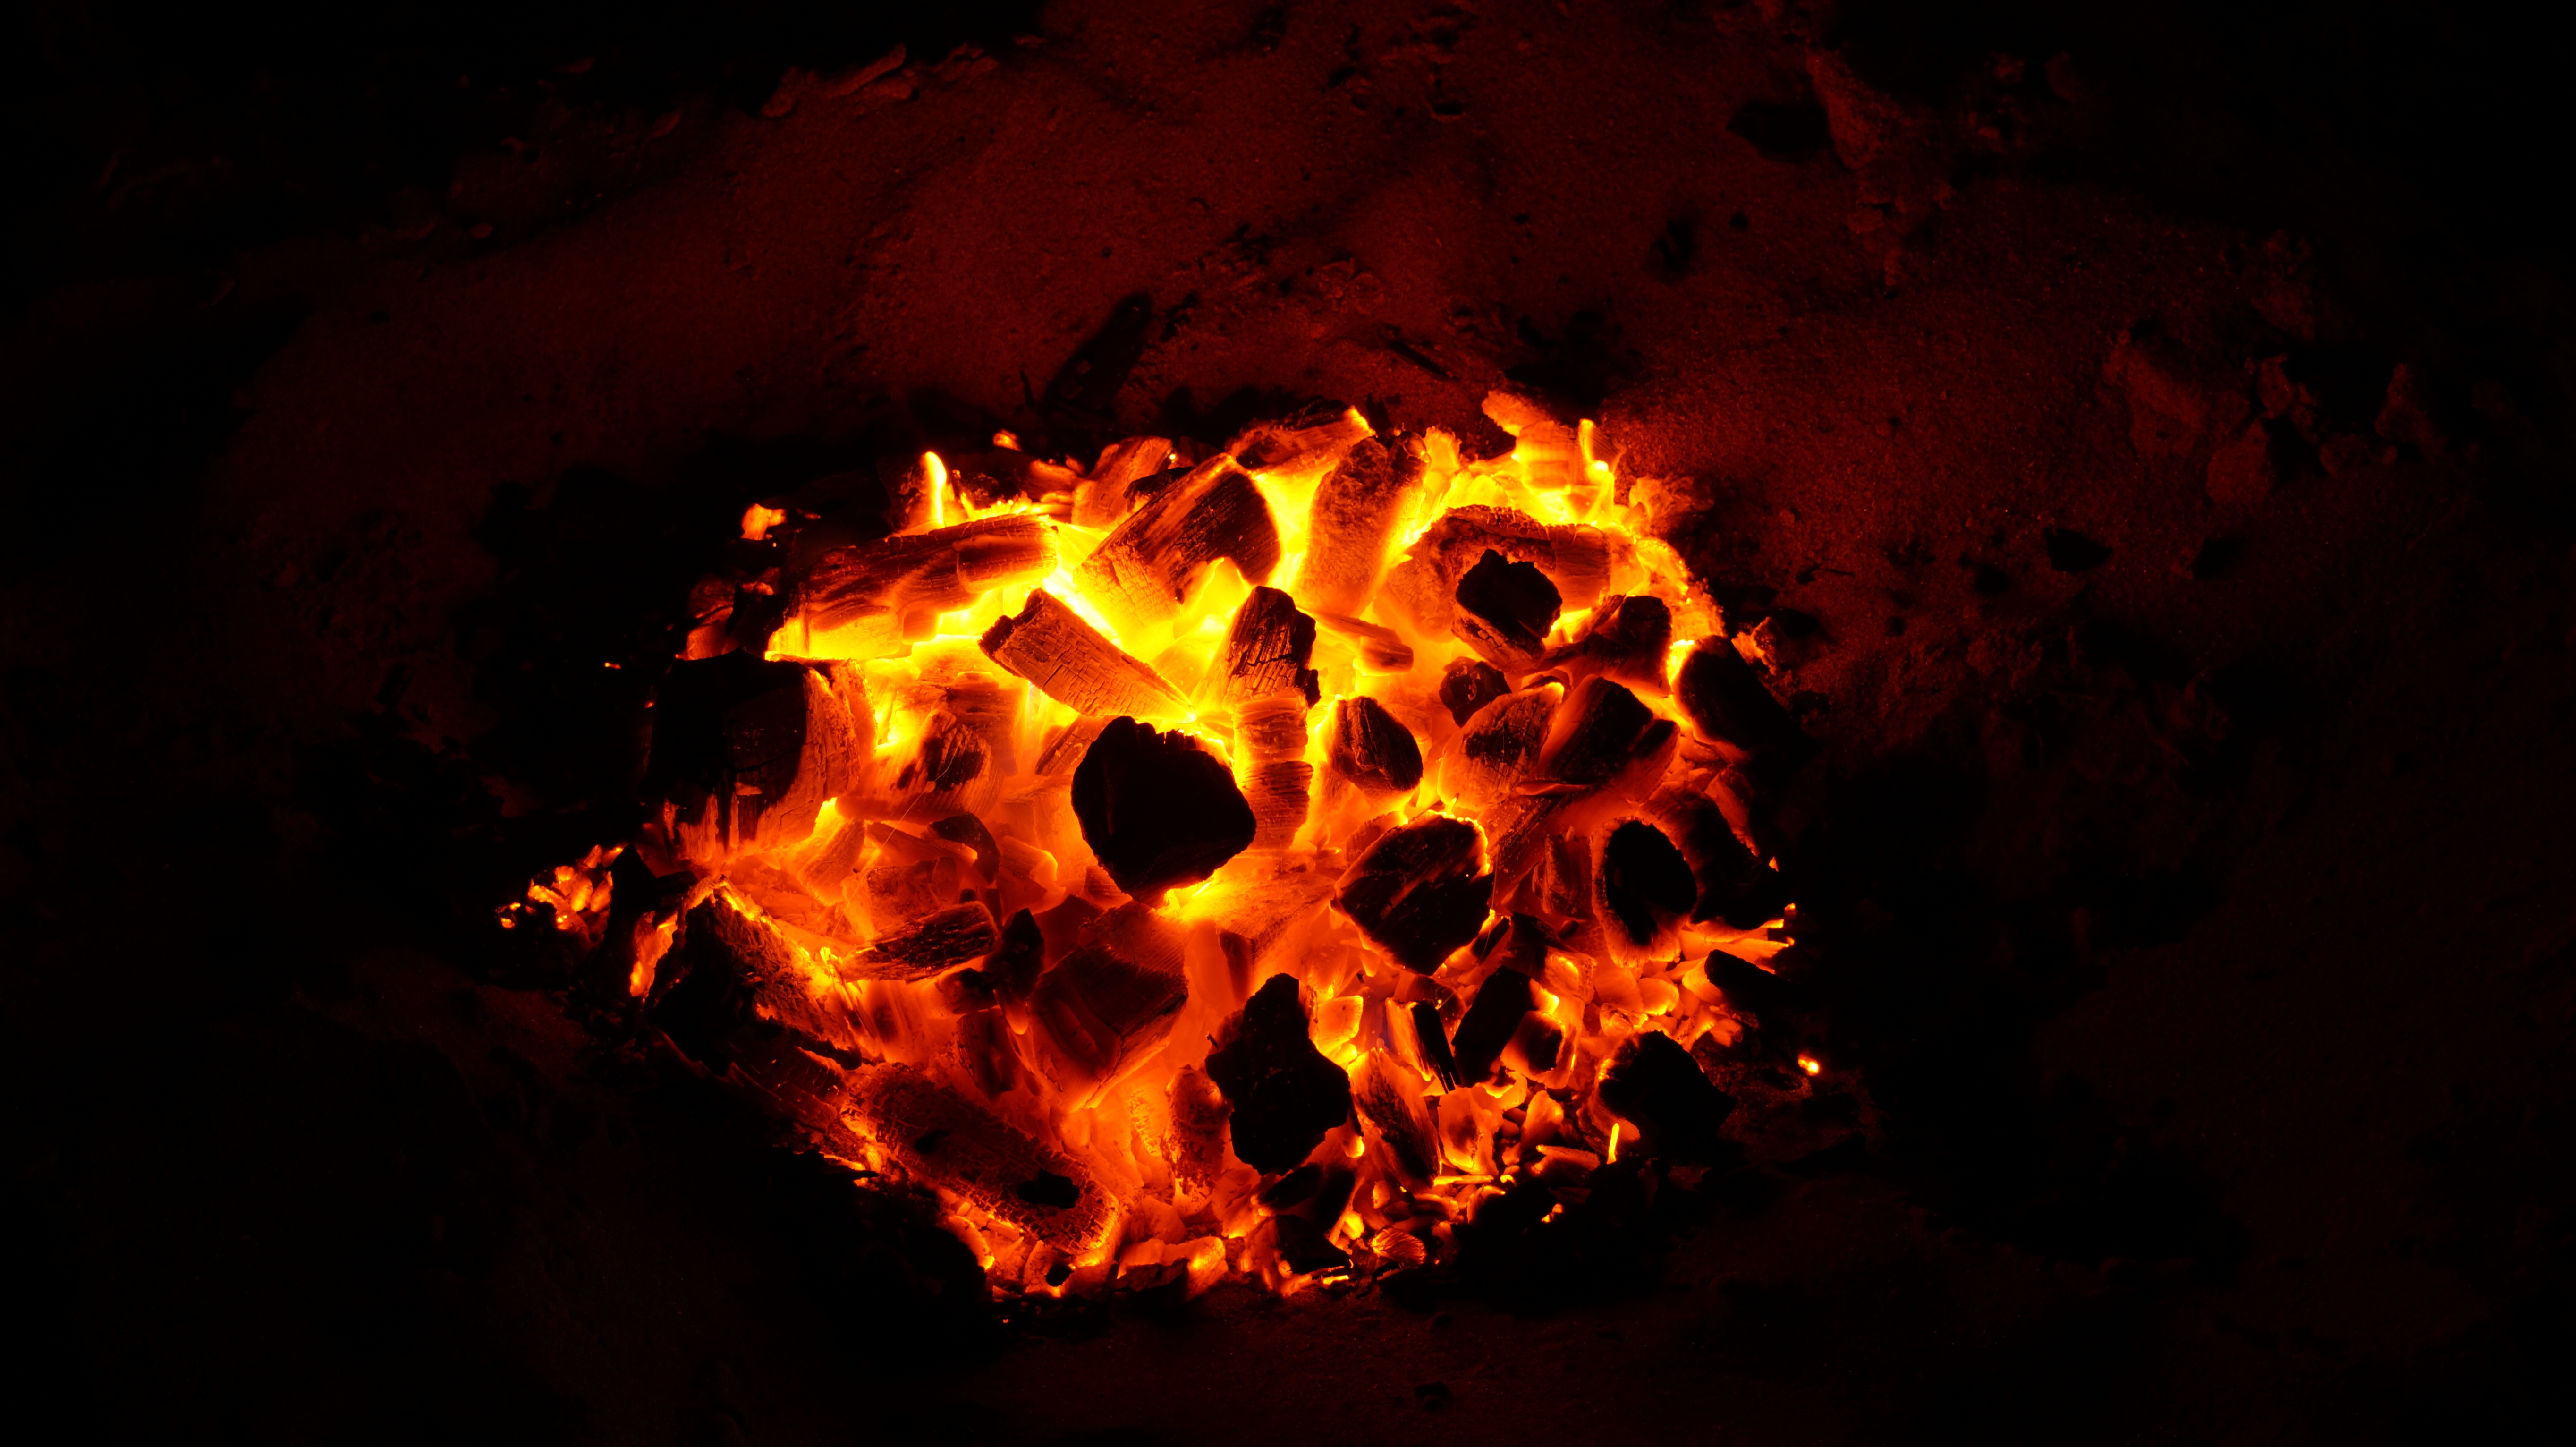 Free Images : glowing, red, flame, fire, glow, darkness, campfire ...